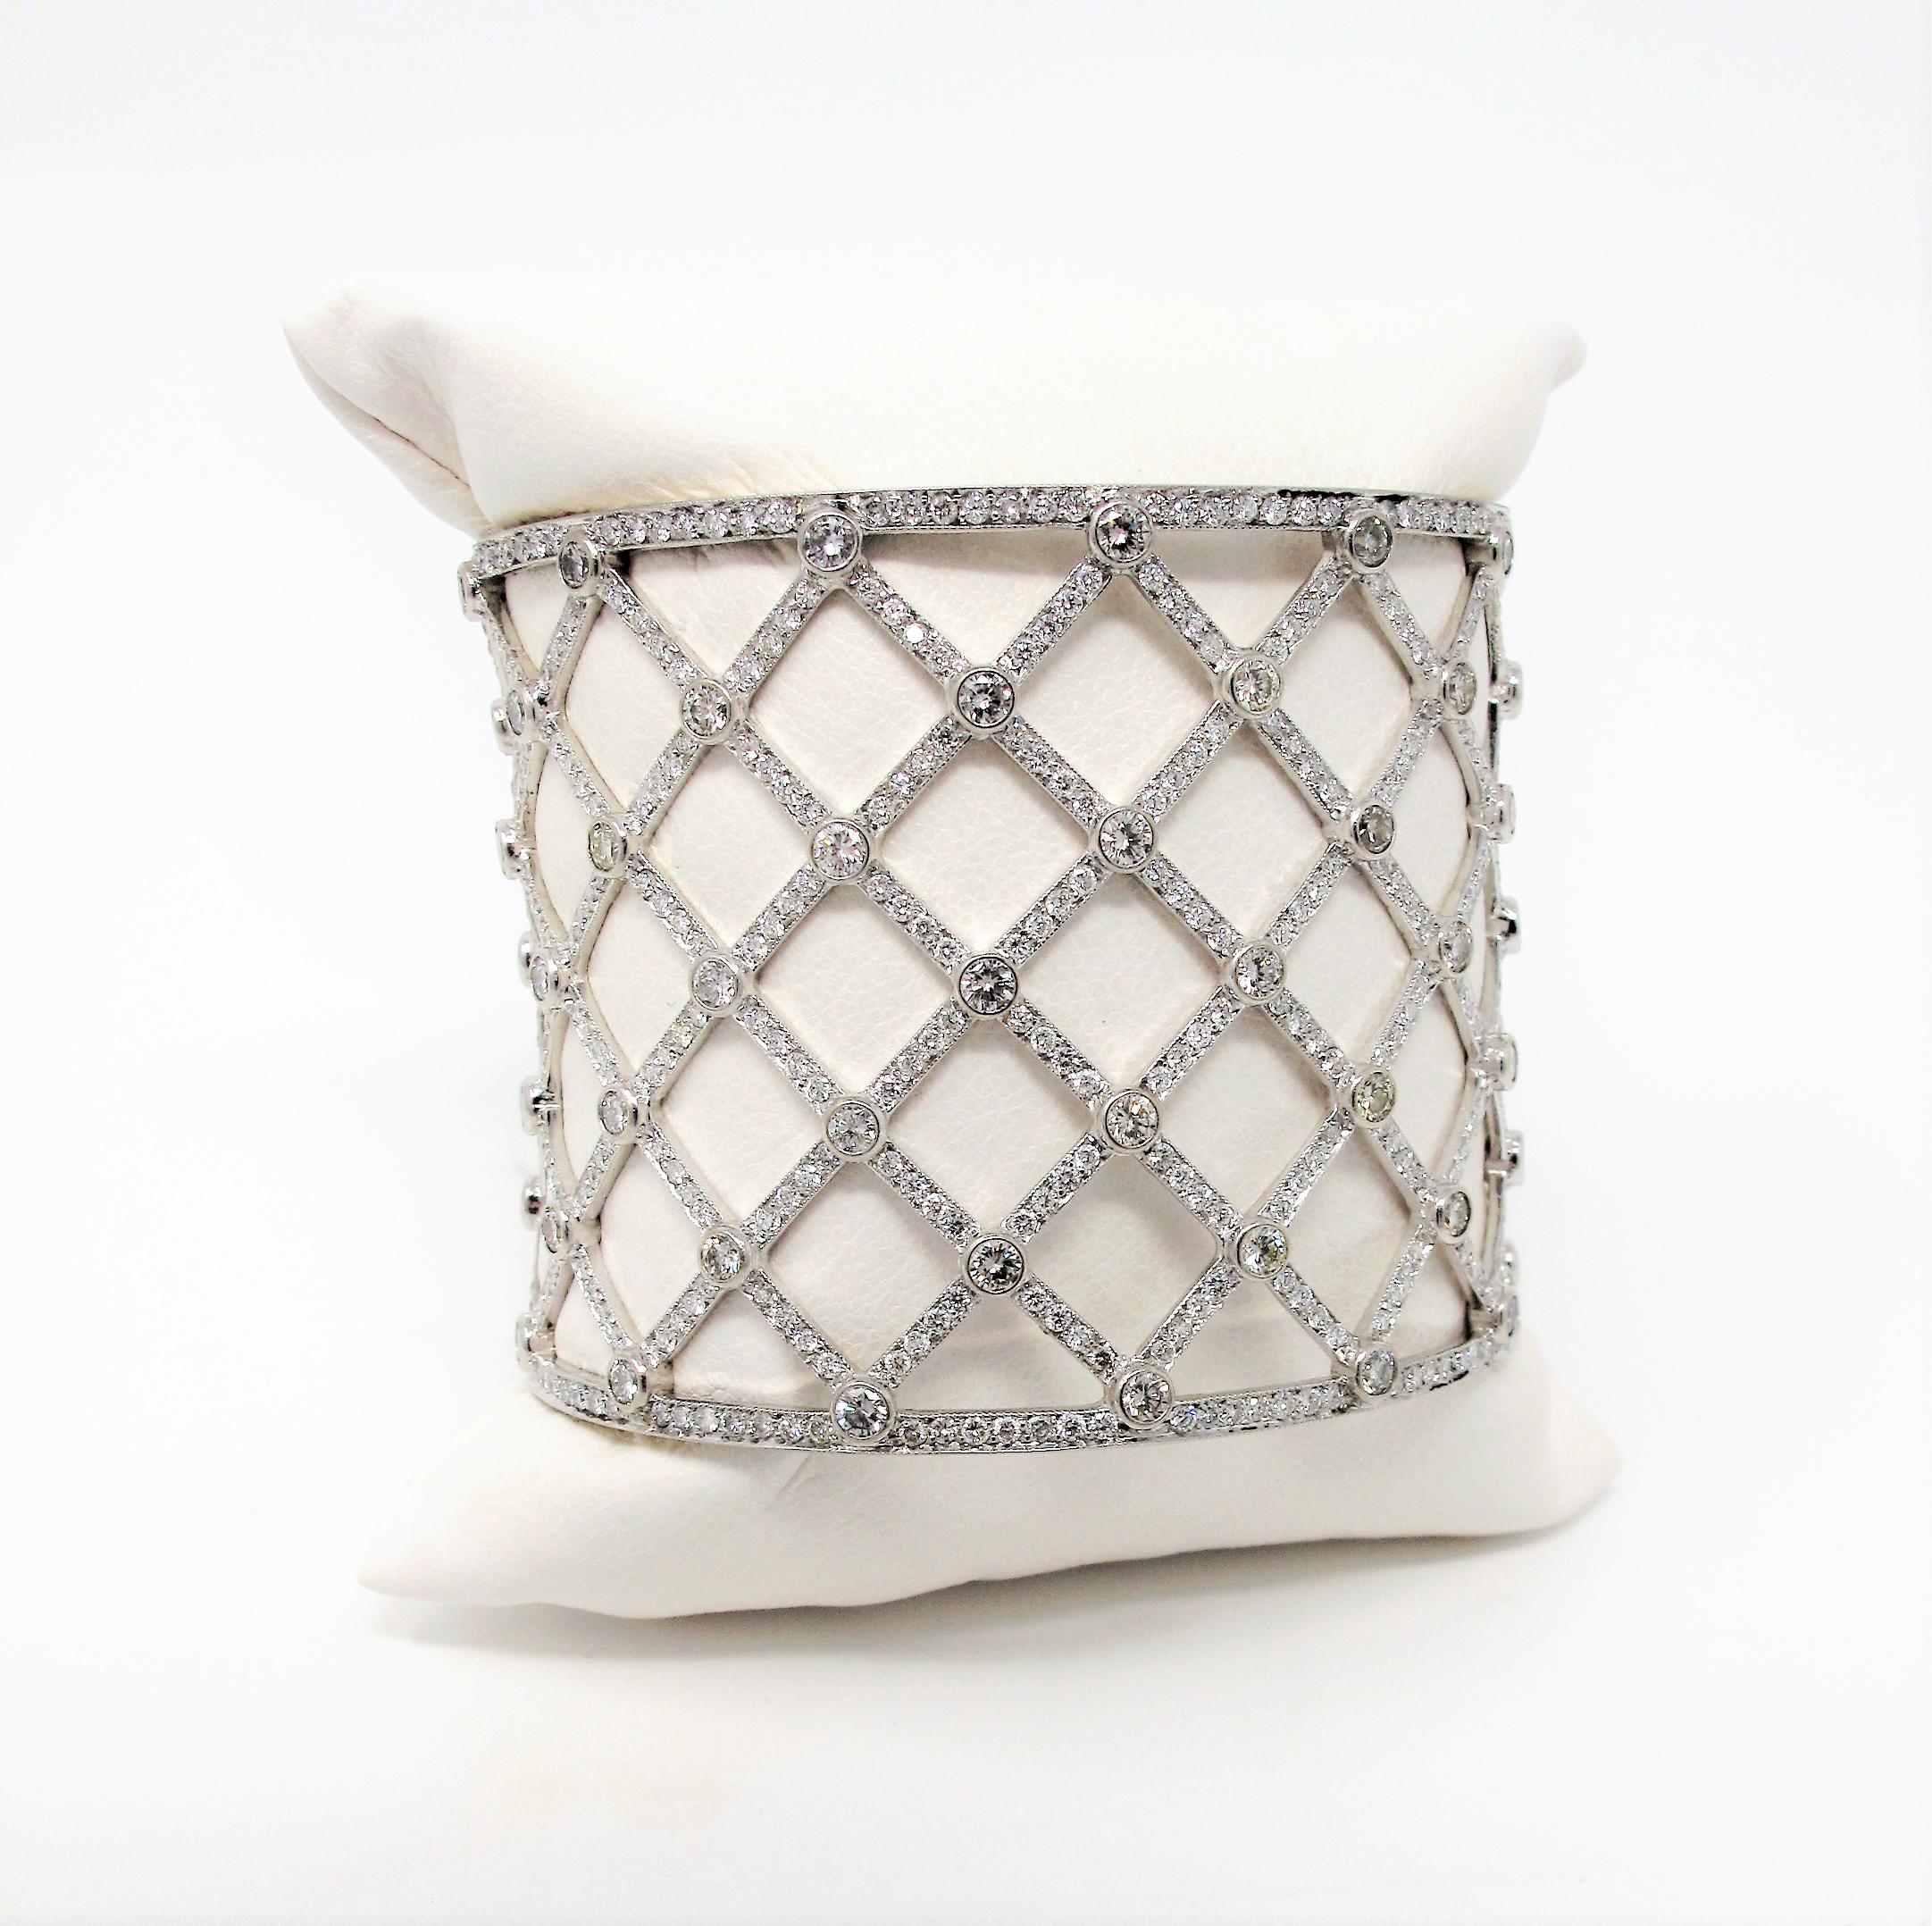 Wrap your wrist in modern elegance with this stunning diamond lattice cuff bracelet. This piece glitters from all directions with hundreds of natural diamonds and is guaranteed to upgrade any look you pair it with. If you are a lover of sparkly